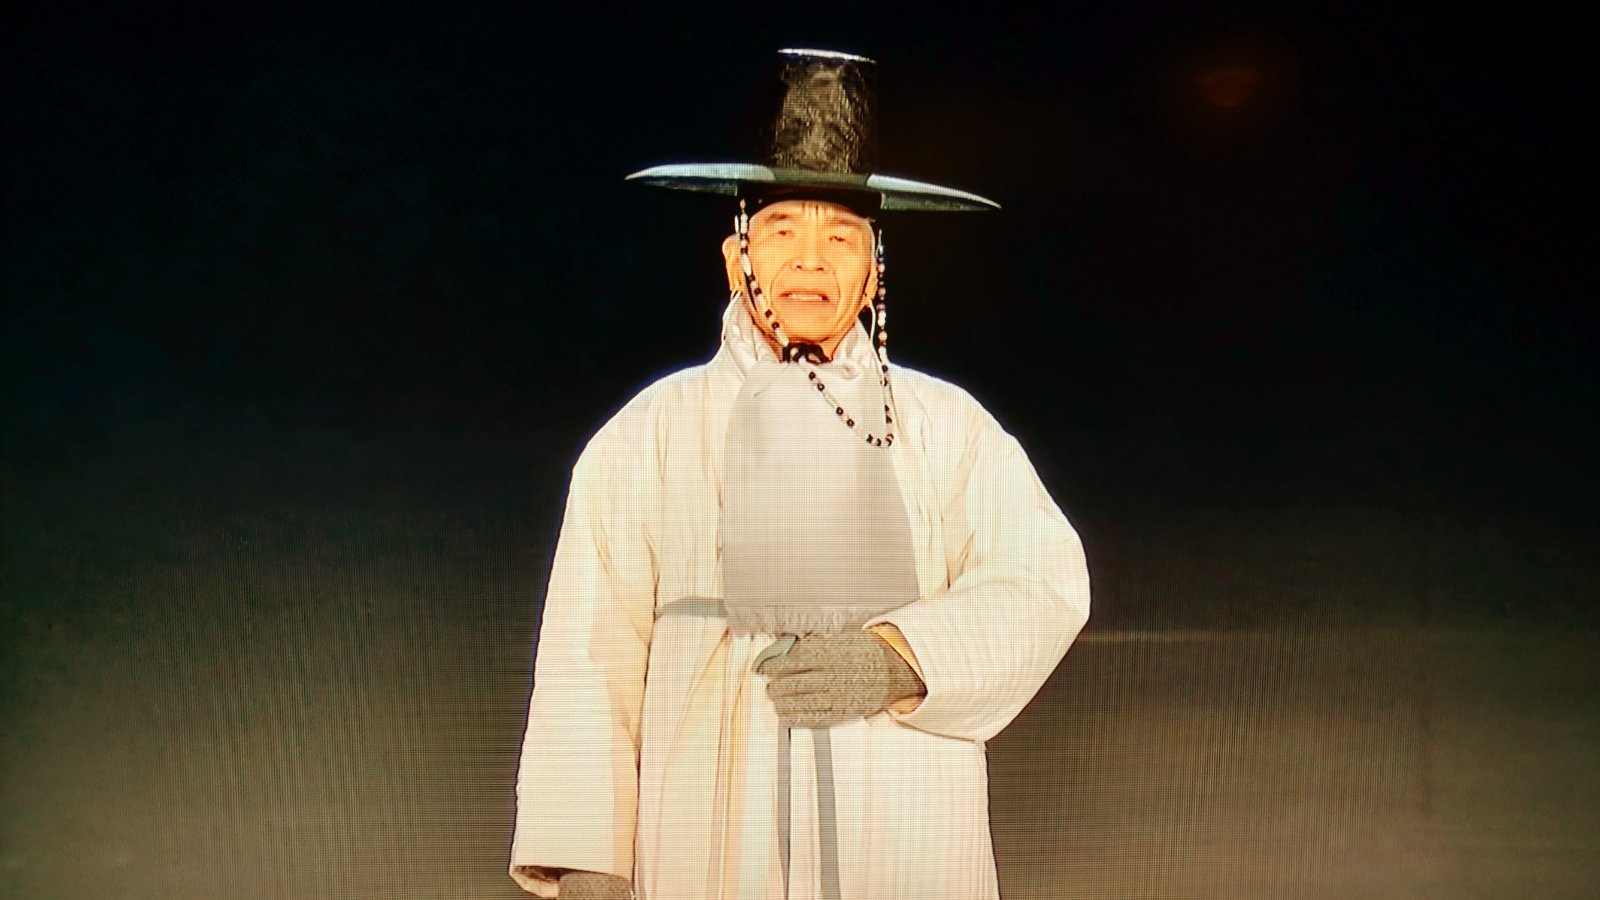 An elder sings a 600 year old song shared by both North and South Korean culture.